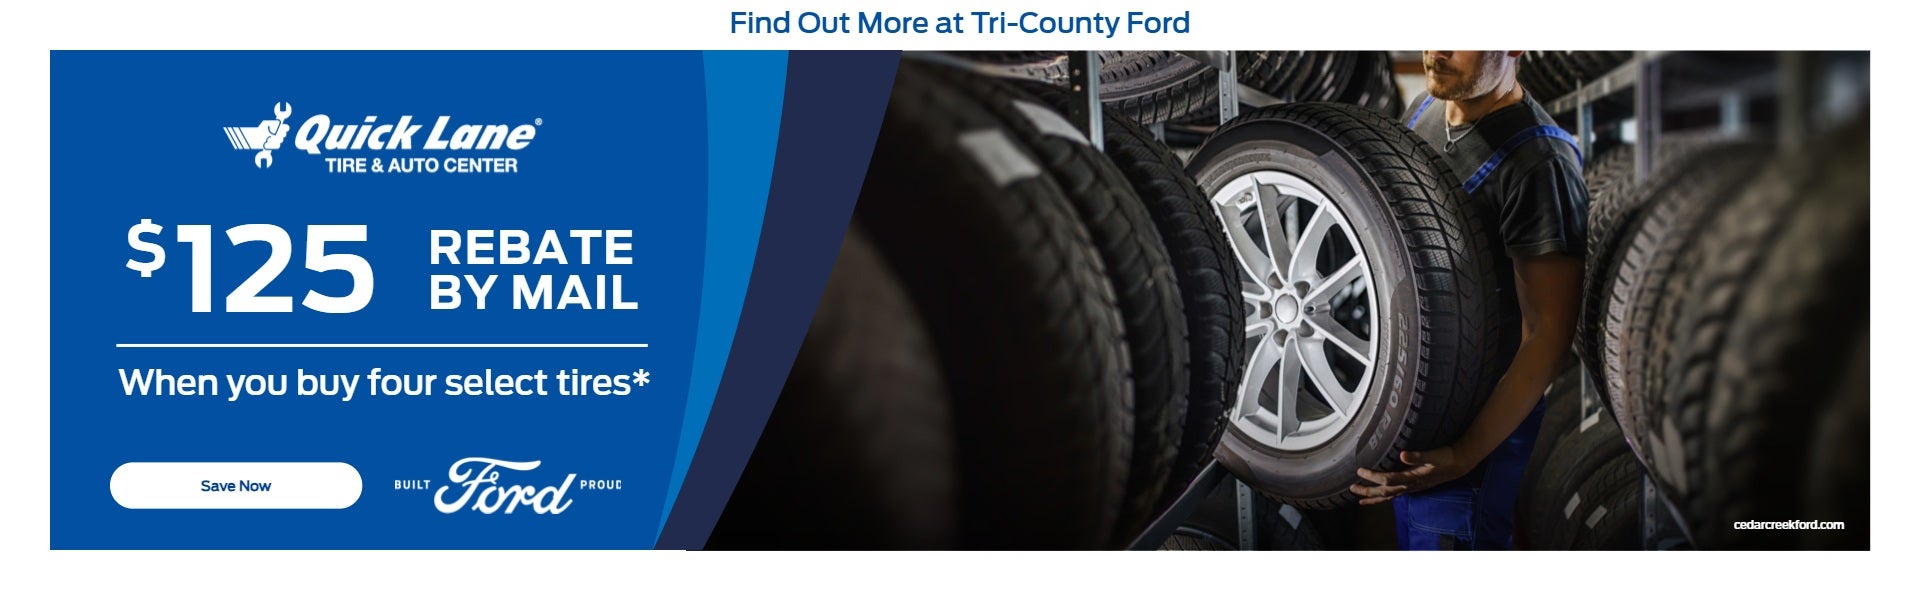 $100 Rebate By Mail on four tires